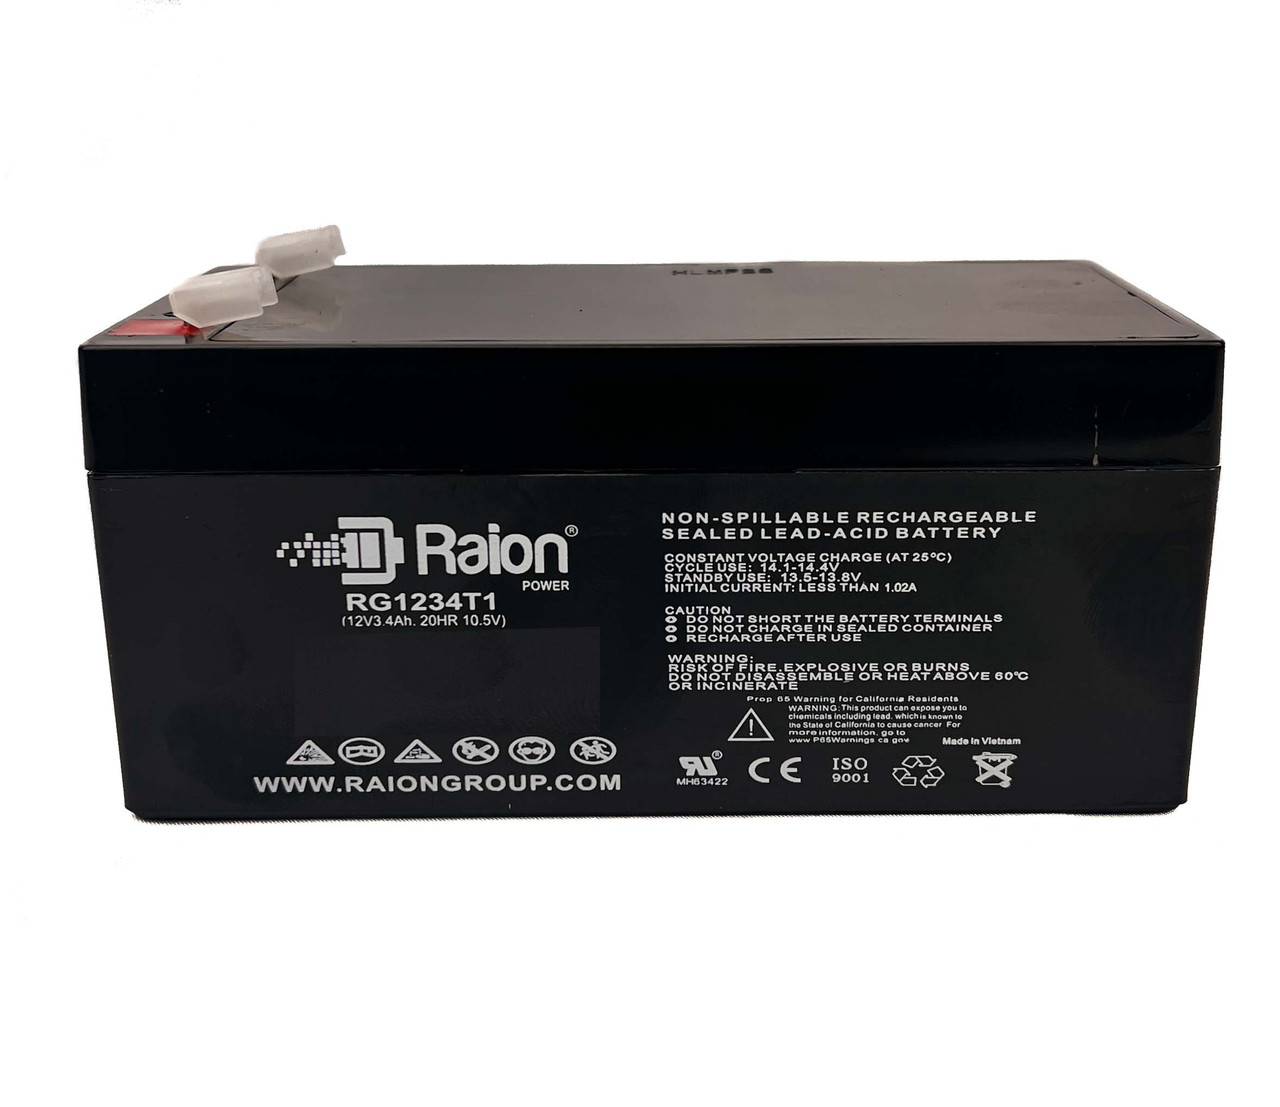 Raion Power RG1234T1 Rechargeable Compatible Replacement Battery for Tysonic TY12-3.4